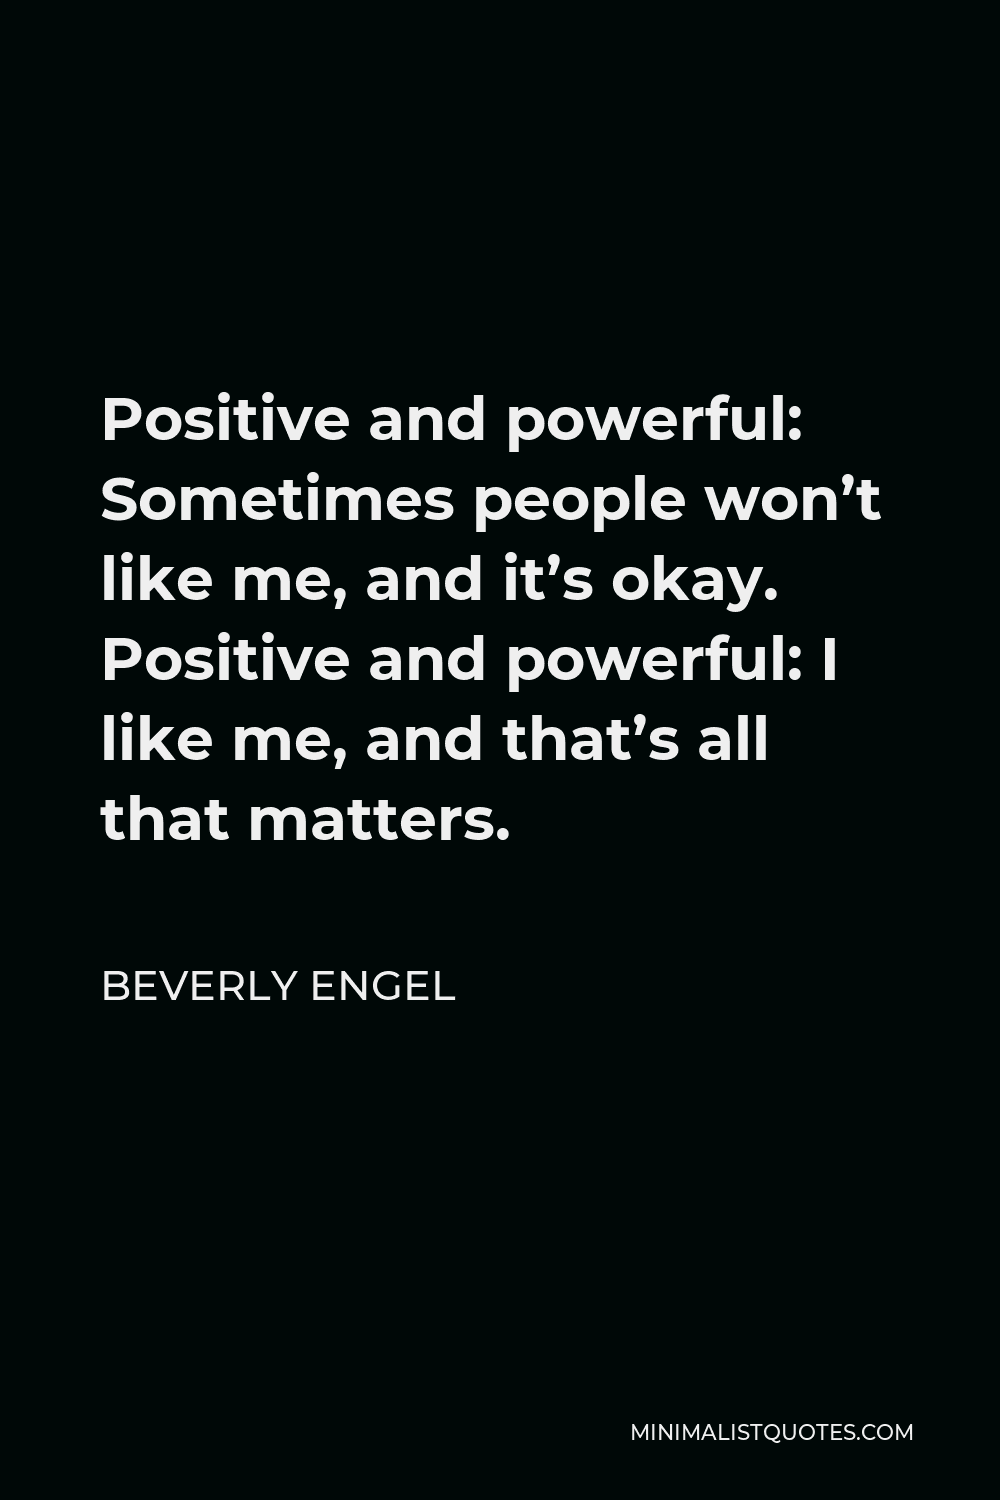 Beverly Engel Quote - Positive and powerful: Sometimes people won’t like me, and it’s okay. Positive and powerful: I like me, and that’s all that matters.